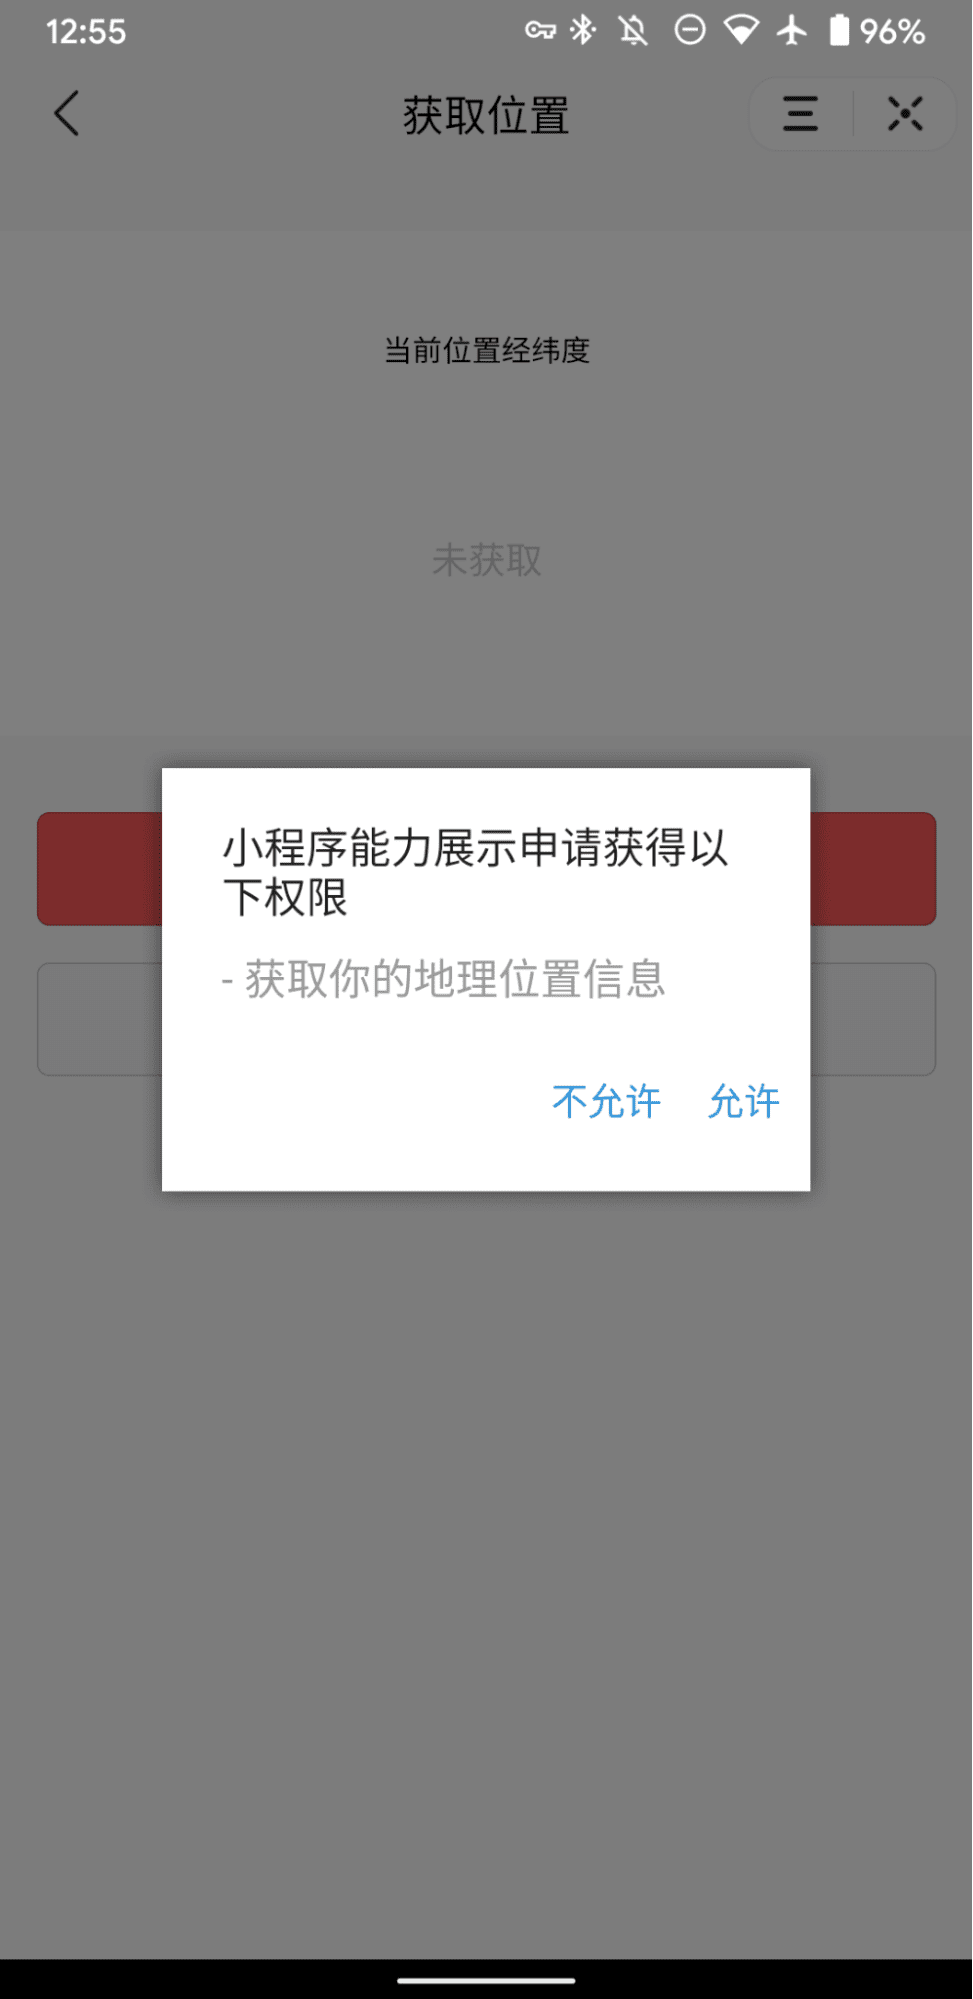 The Douyin demo mini app showing a geolocation prompt with two options: 'Not Allowed' and 'Allowed'.